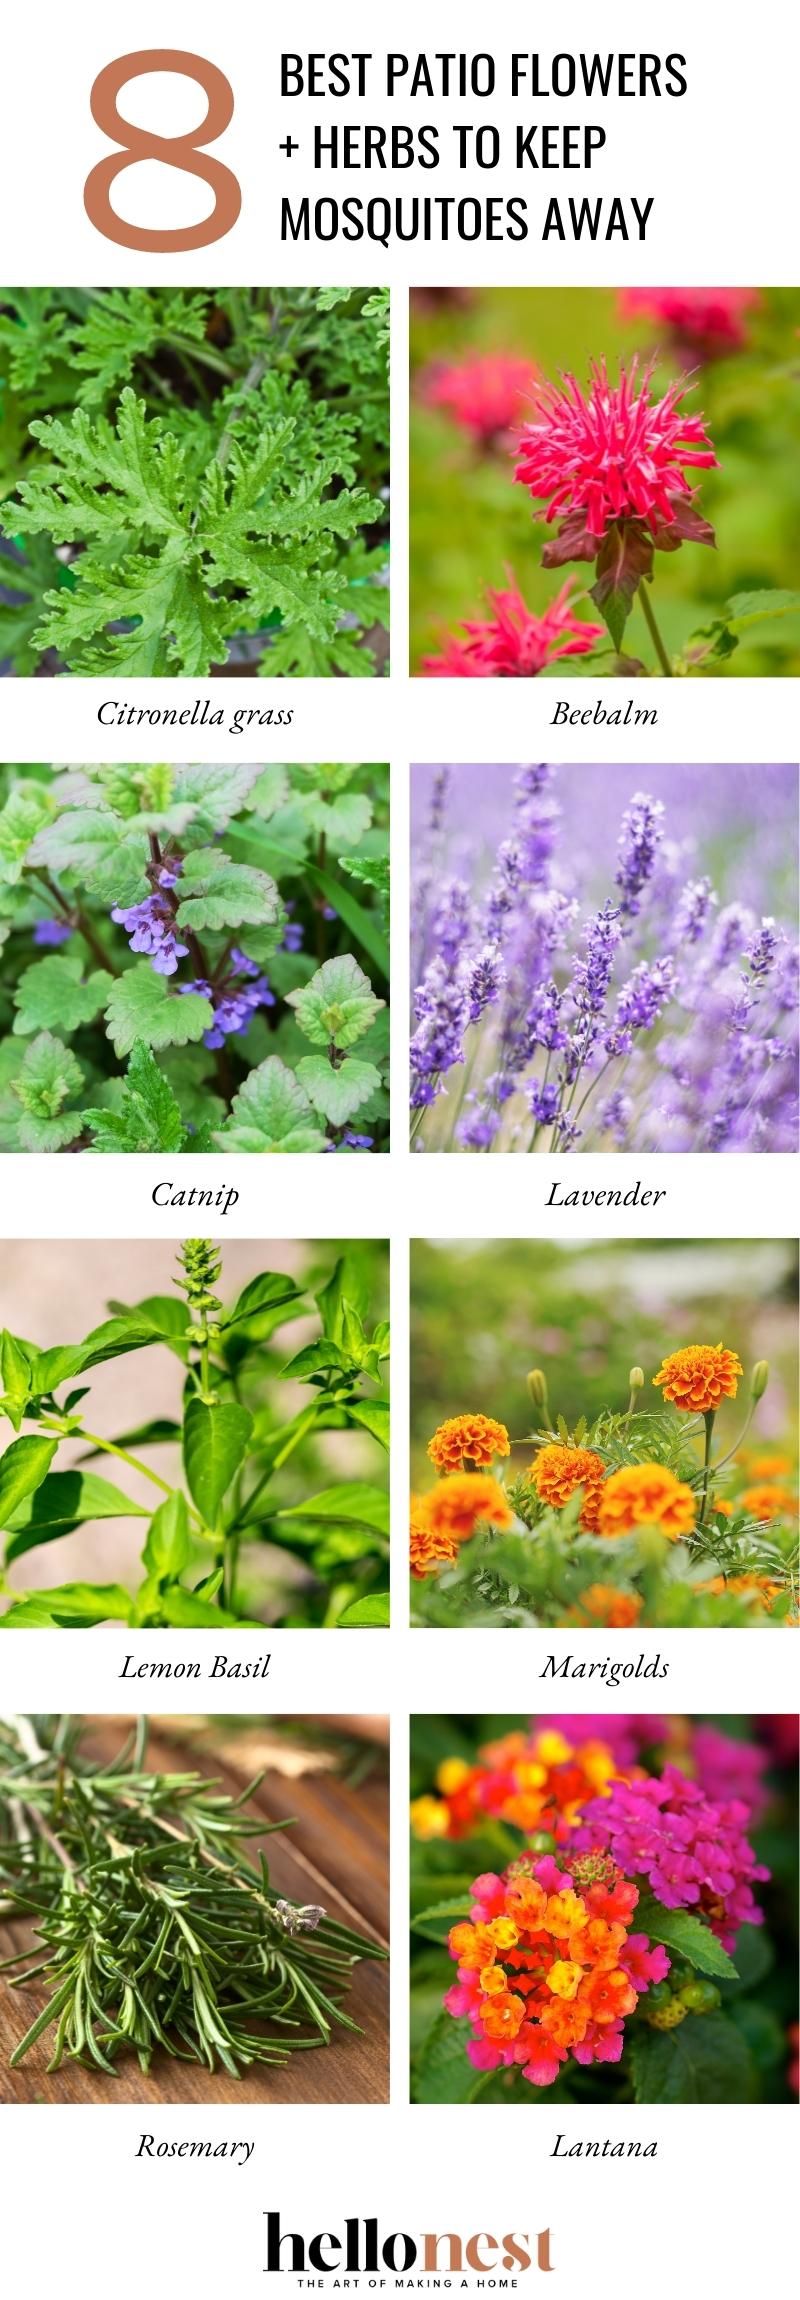 Best Patio Flowers and Herbs to Keep Mosquitoes Away - Hello Nest